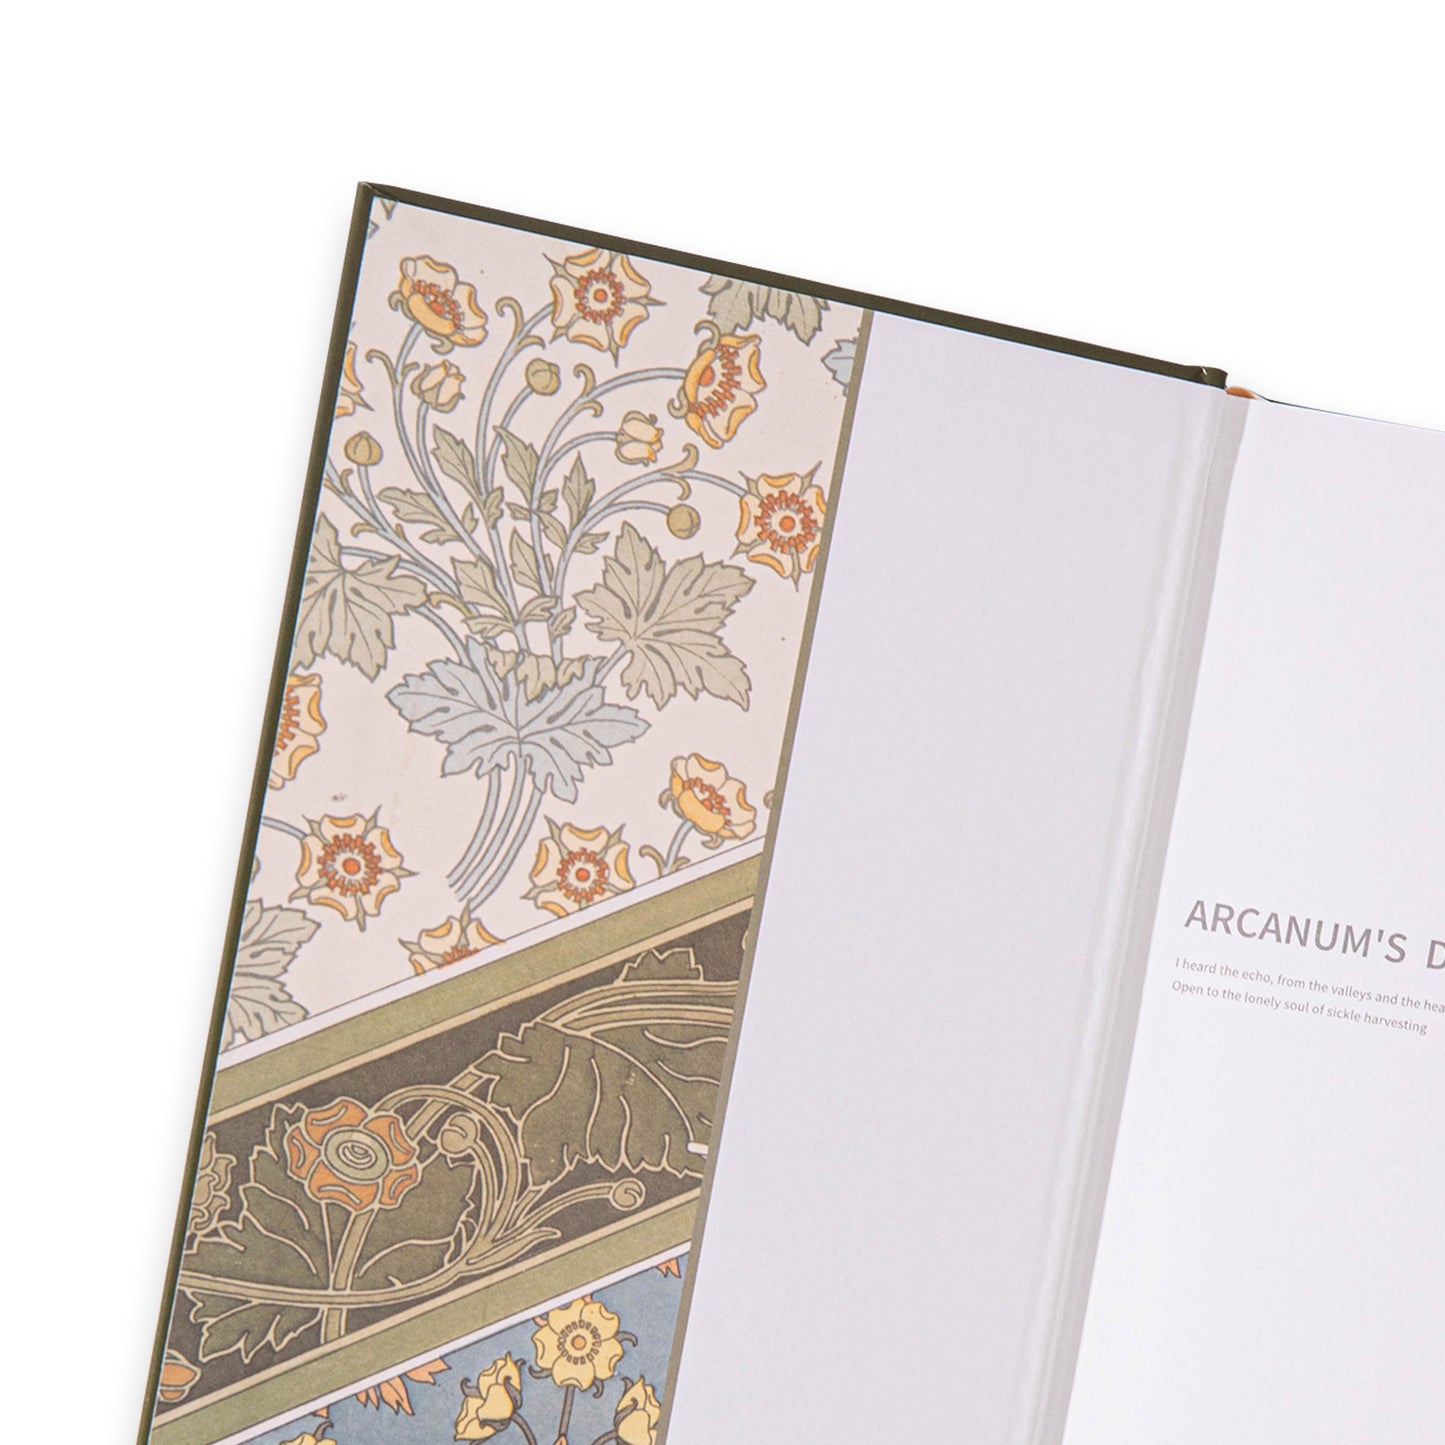 Arcanum's Dream Gold Foil Notebook - A5 - Lined - Dallas